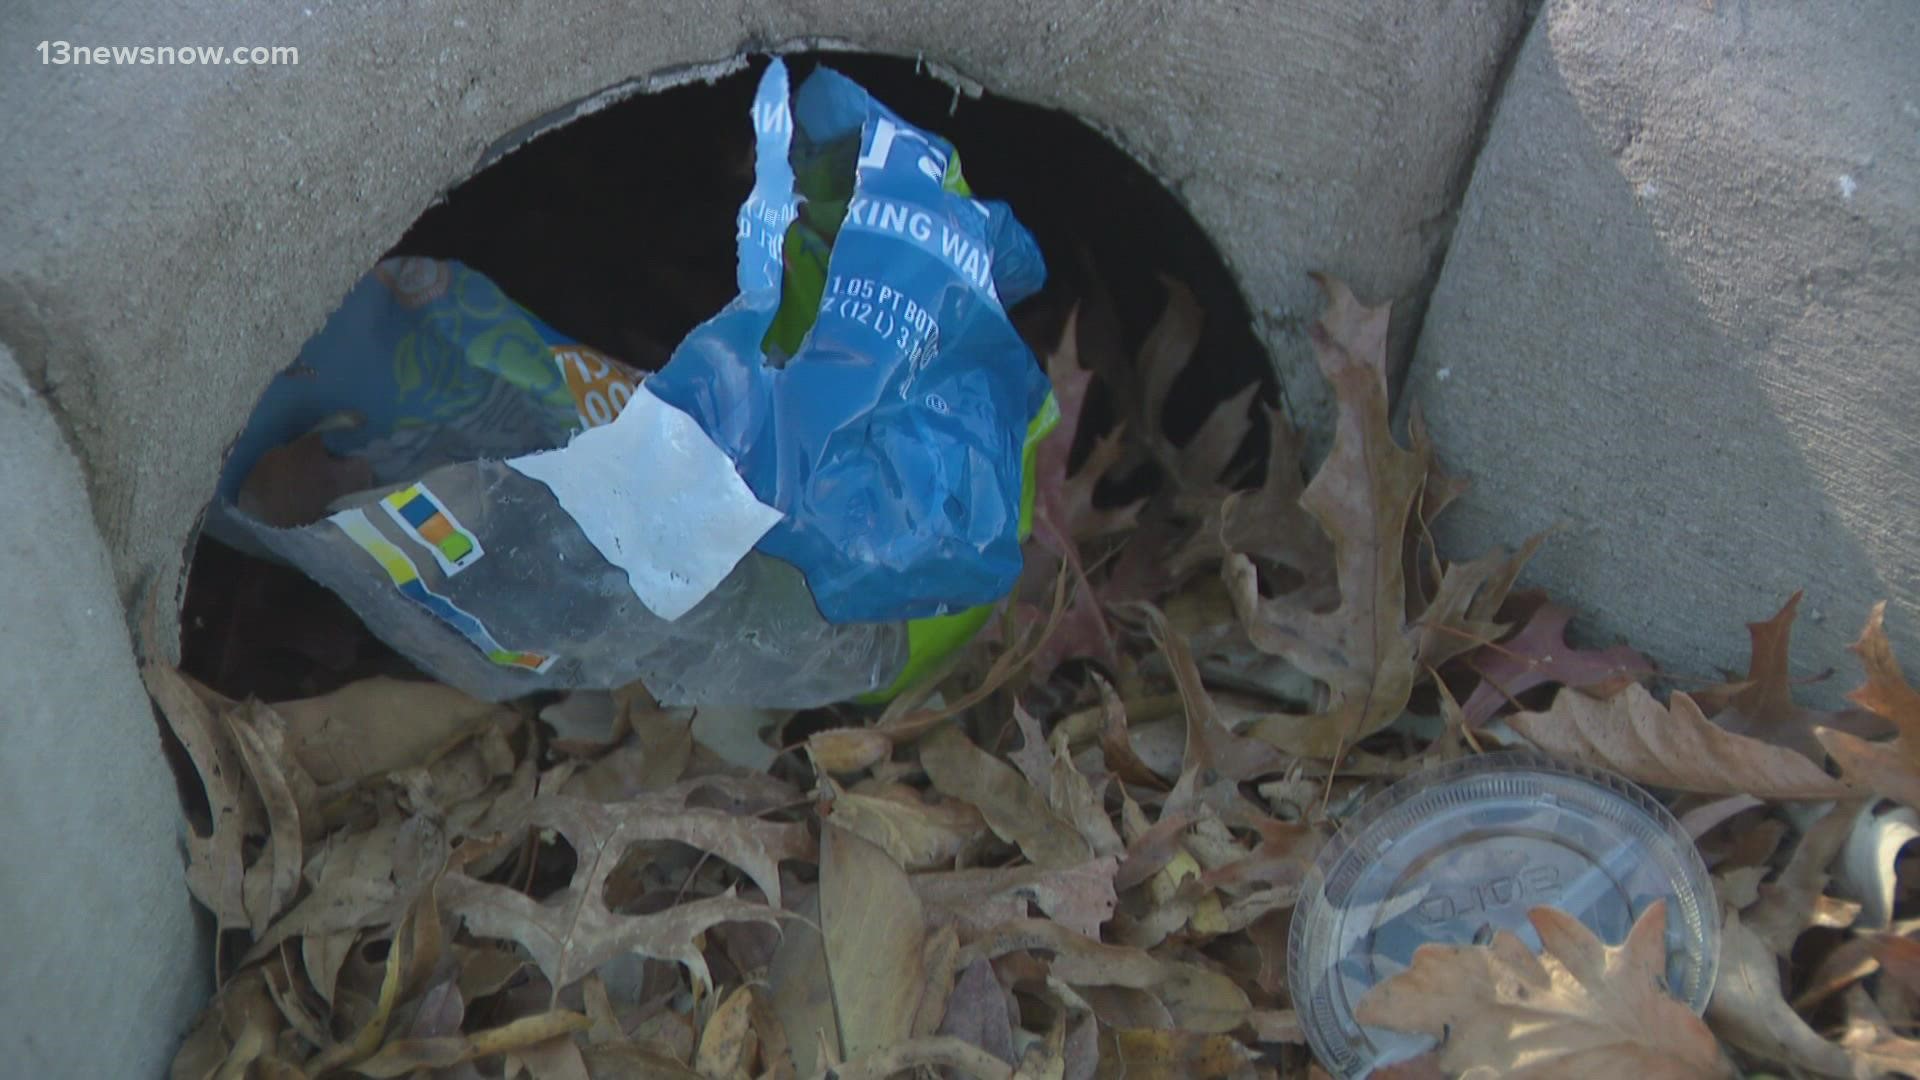 Norfolk received a $50,000 grant to research trash patterns.